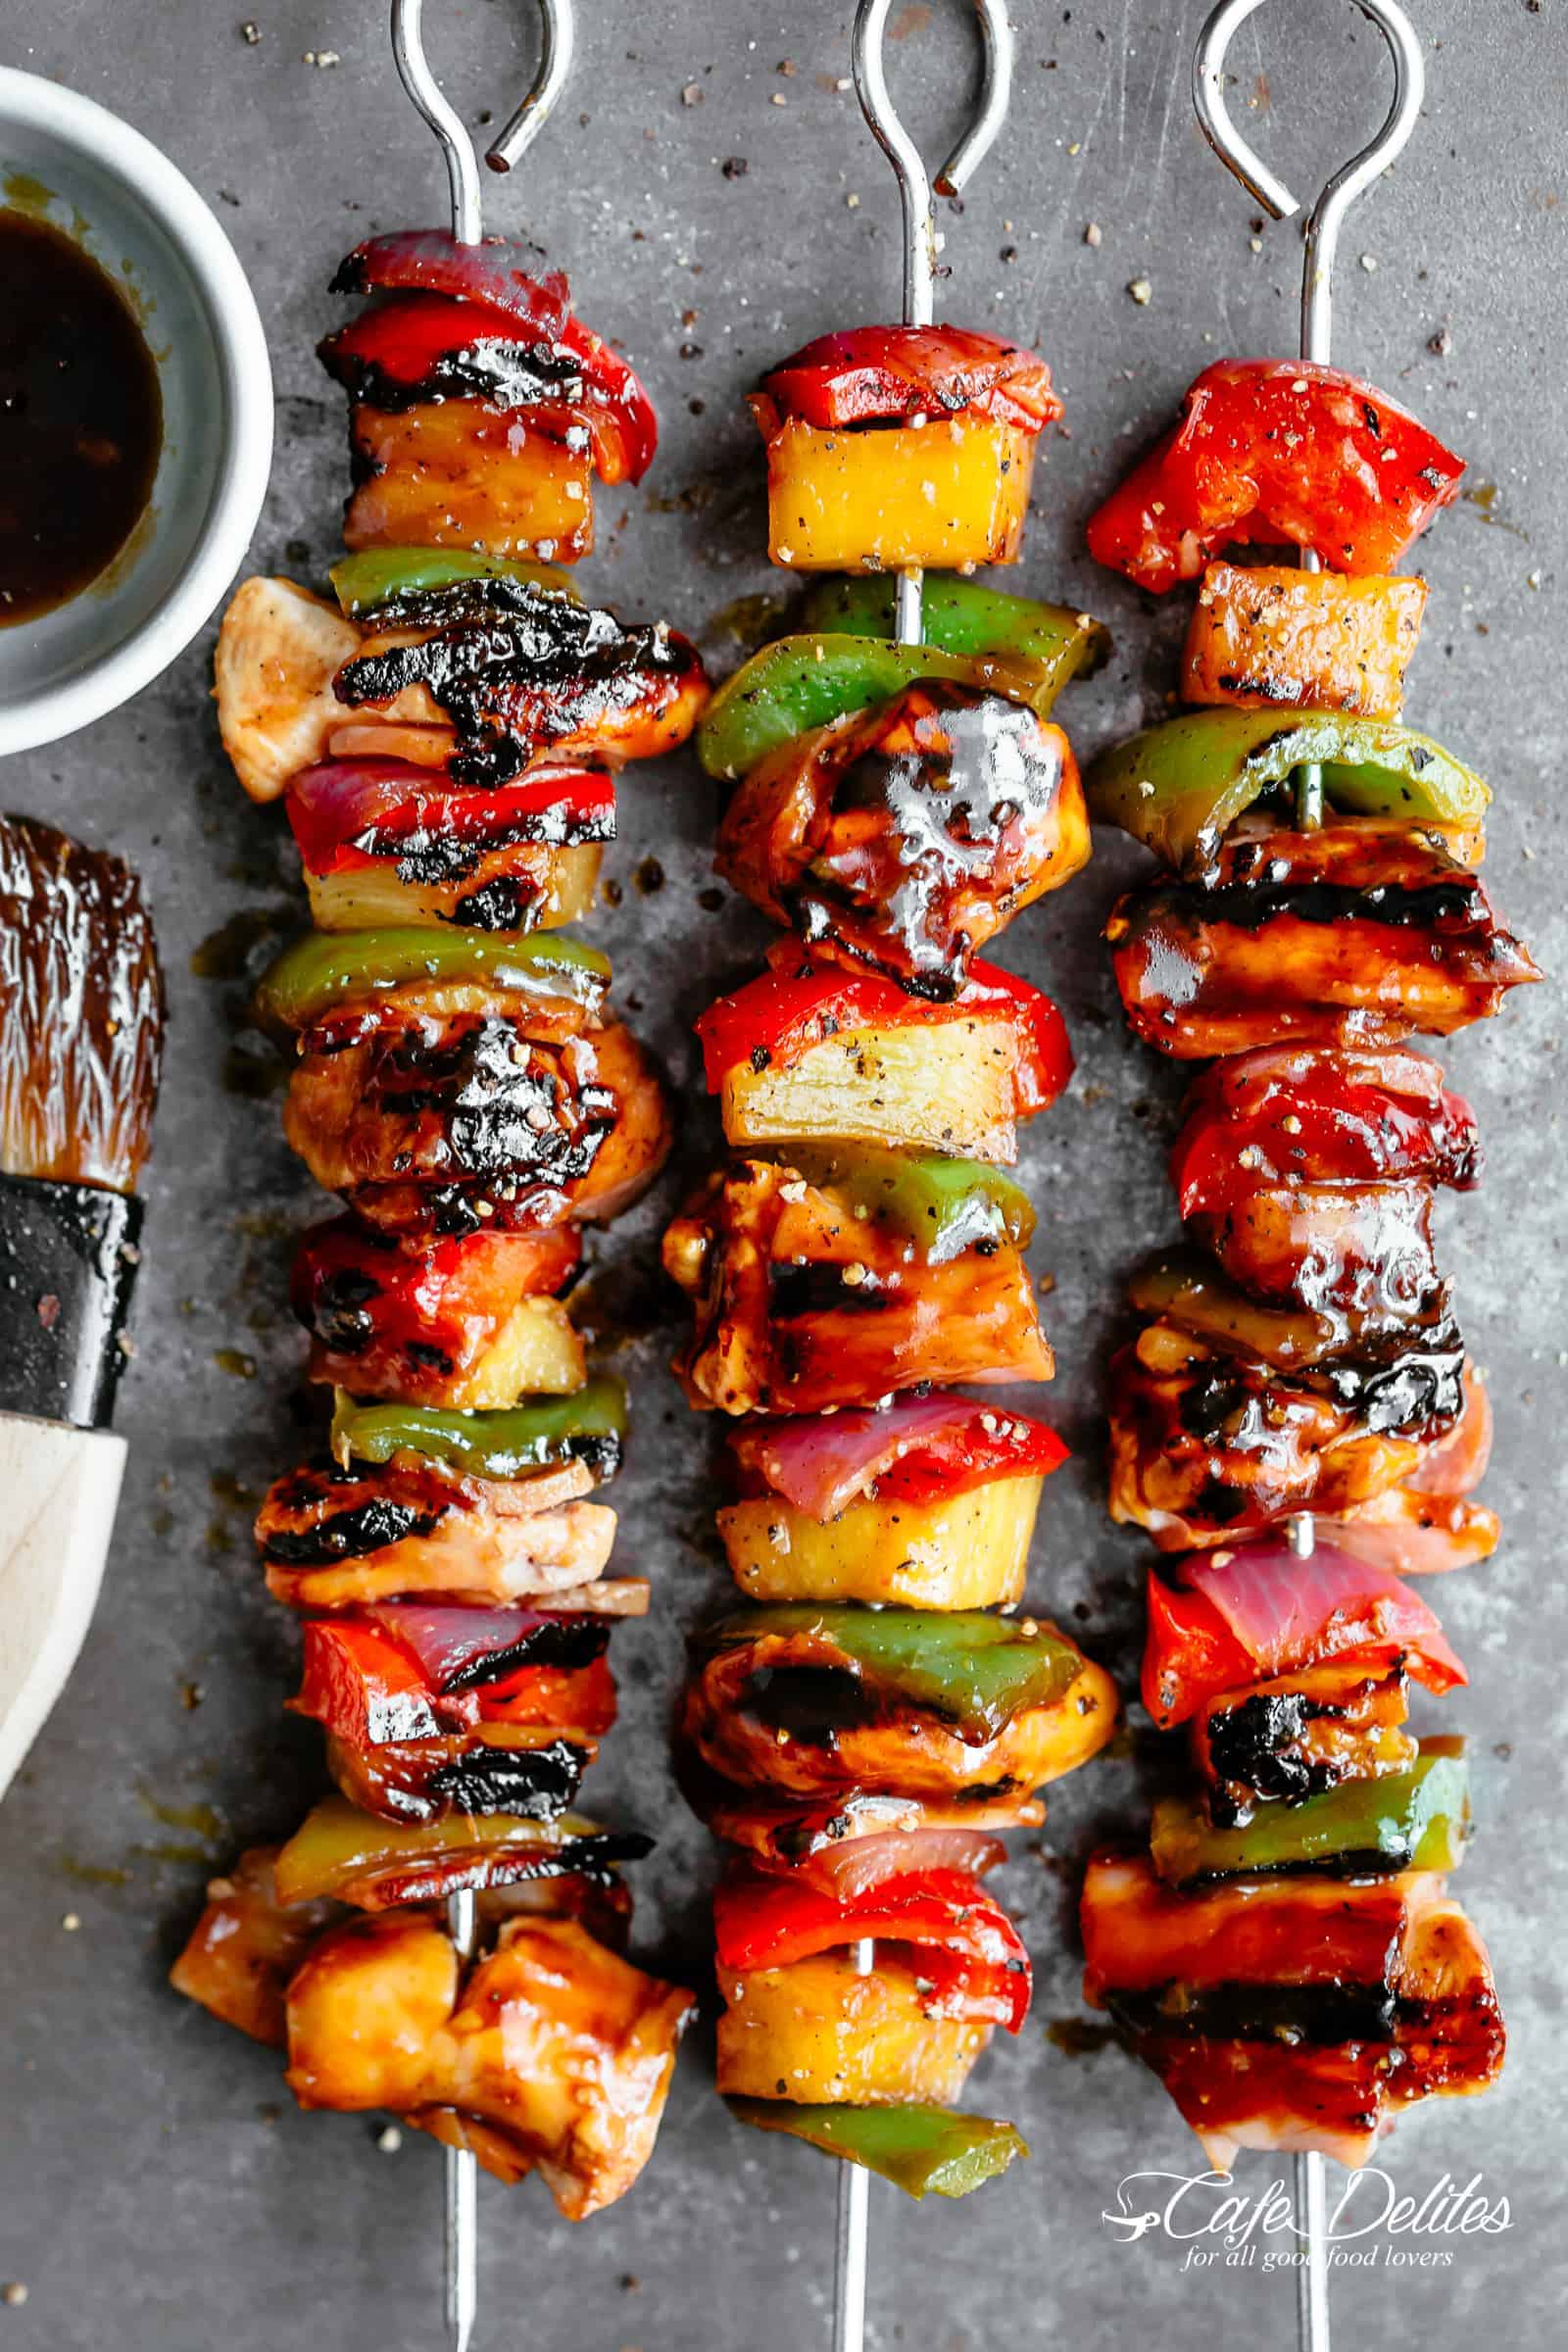 Hawaiian Bacon Pineapple Chicken Kebabs with a BBQ twist! Crispy bacon and chicken smothered in a Hawaiian style pineapple and barbecue sauce, these skewers are so addictive! | https://cafedelites.com